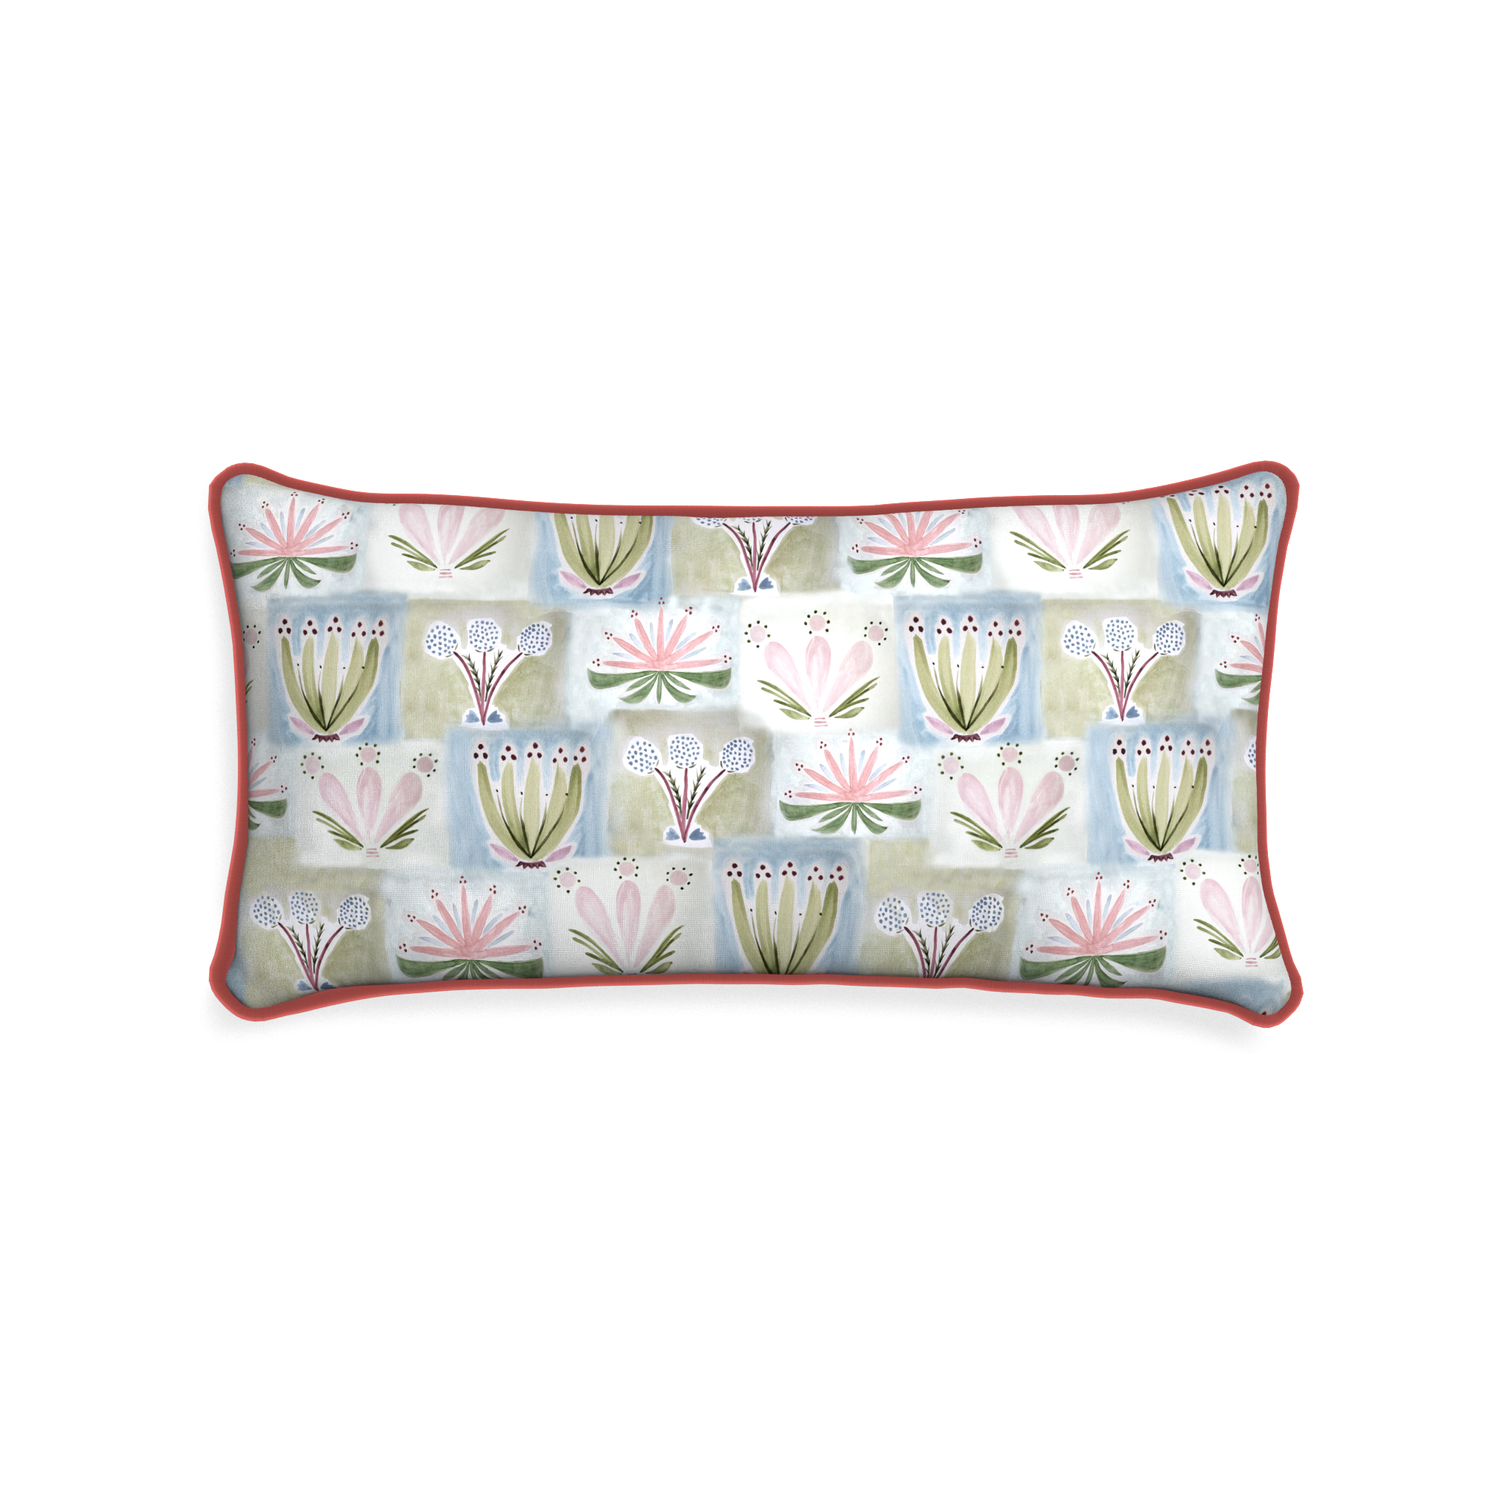 Midi-lumbar harper custom hand-painted floralpillow with c piping on white background